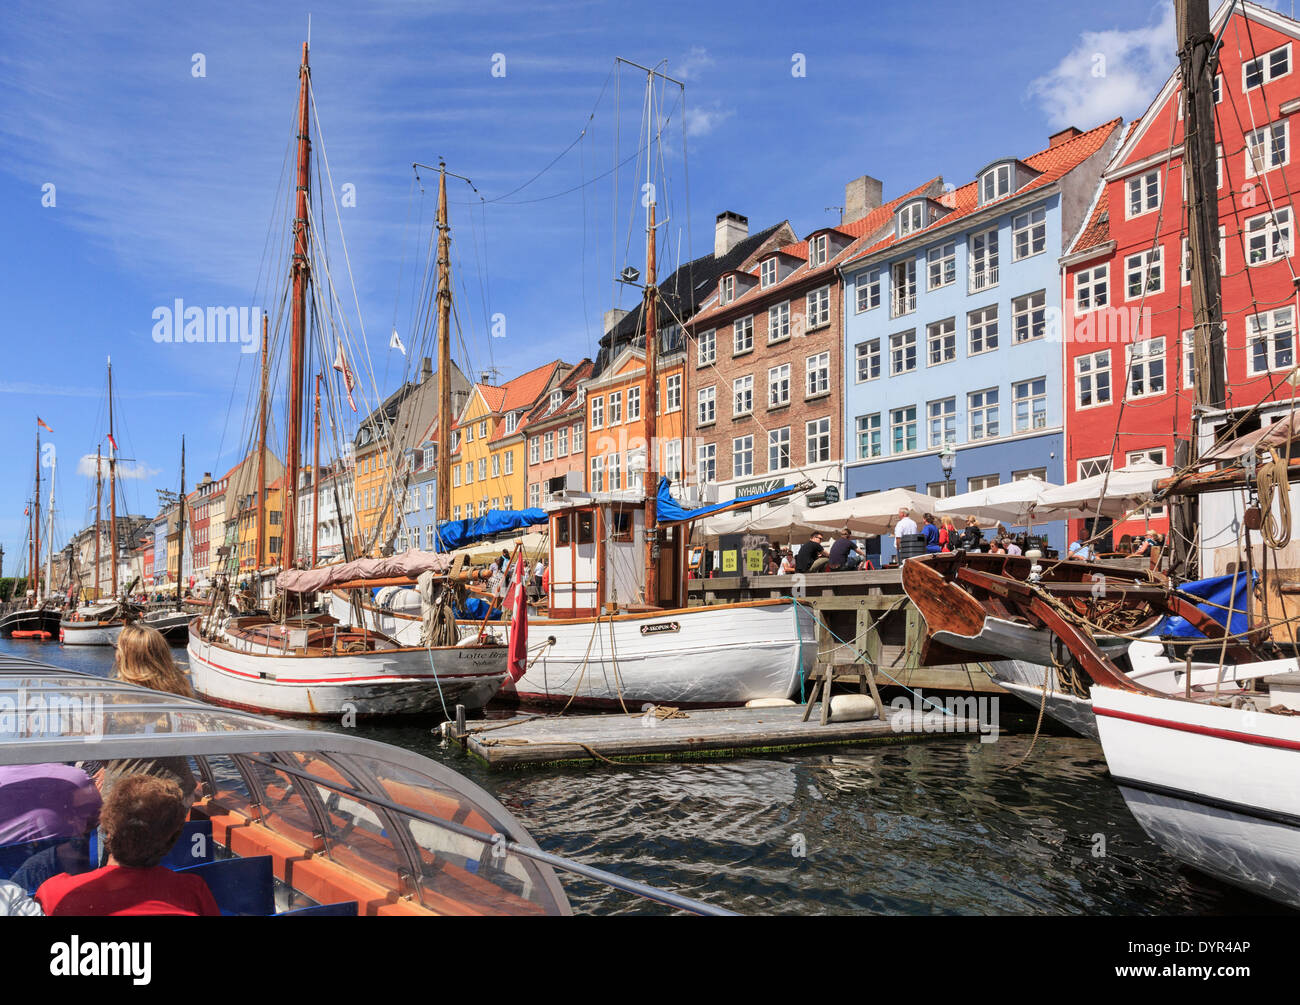 Tourists on Copenhagen canal tour boat with old wooden boats moored in front of colourful buildings on Nyhavn, Copenhagen, Zealand, Denmark Stock Photo